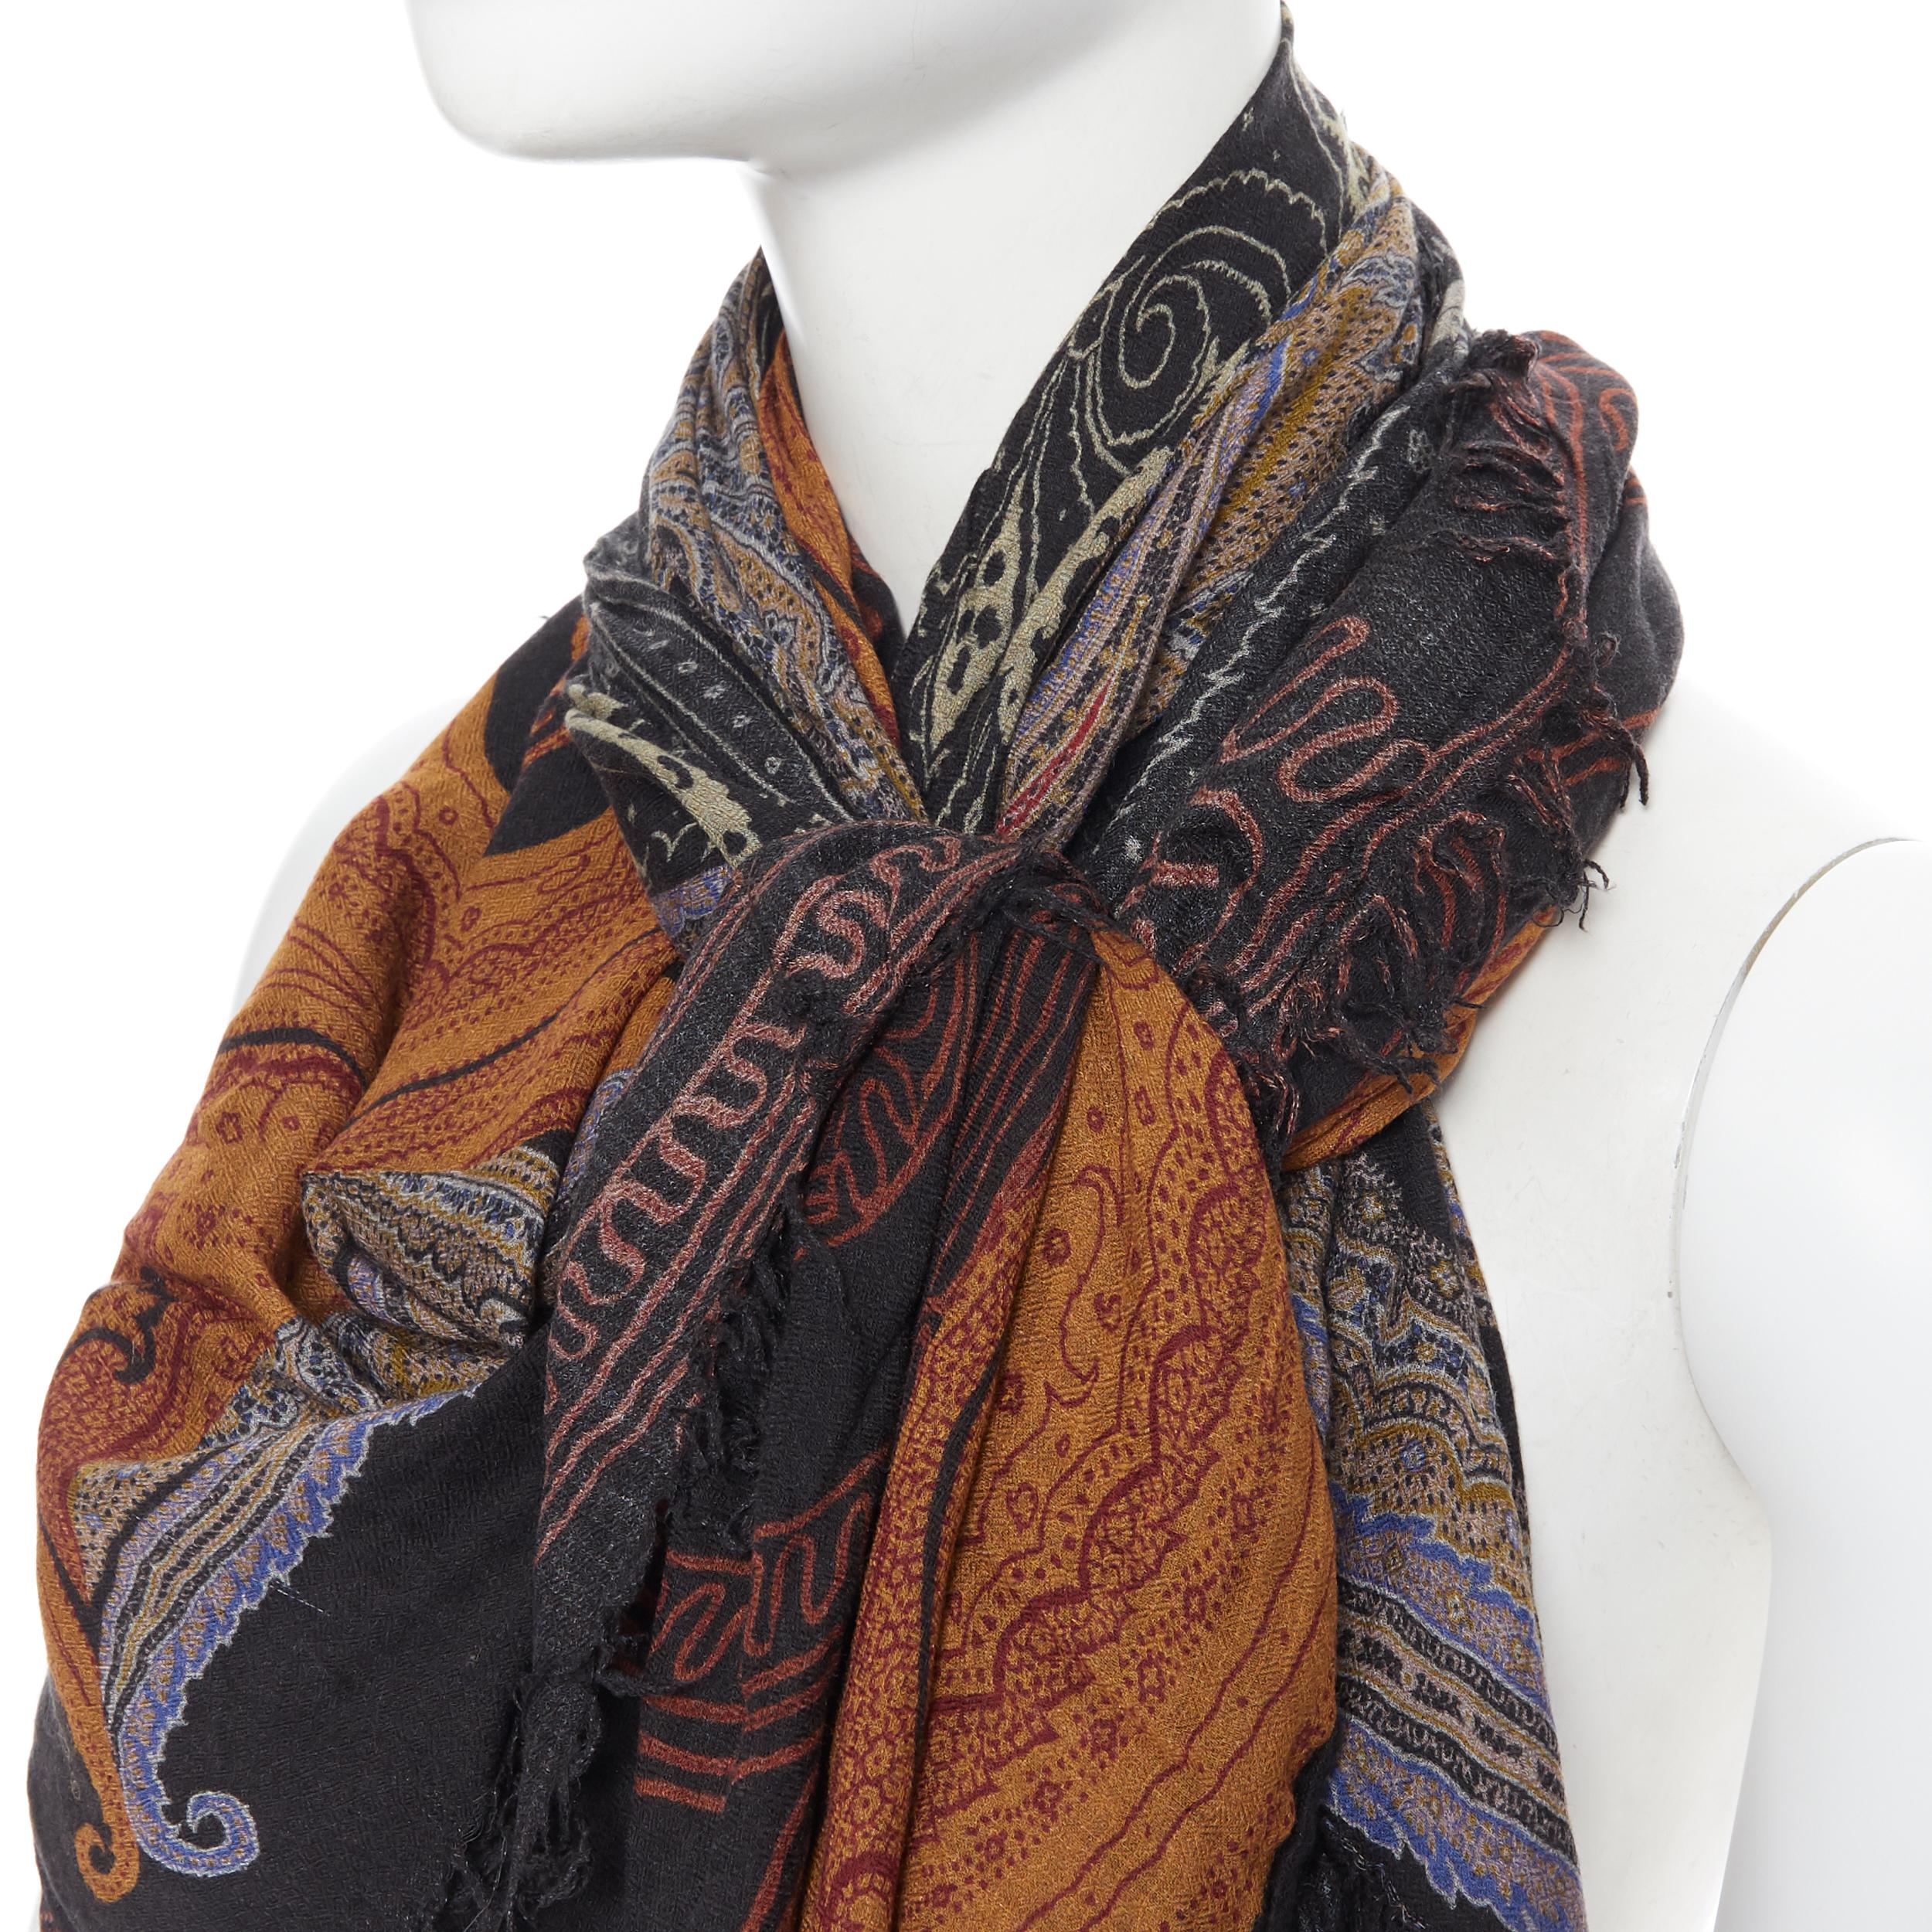 ETRO modal cashmere blend signature paisley print fringe trimmed scarf
Brand: Etro
Model Name / Style: Print scarf
Material: Modal, cashmere
Color: Black
Pattern: Abstract
Extra Detail: Signature Etro paisley print.
Made in: Italy

CONDITION: